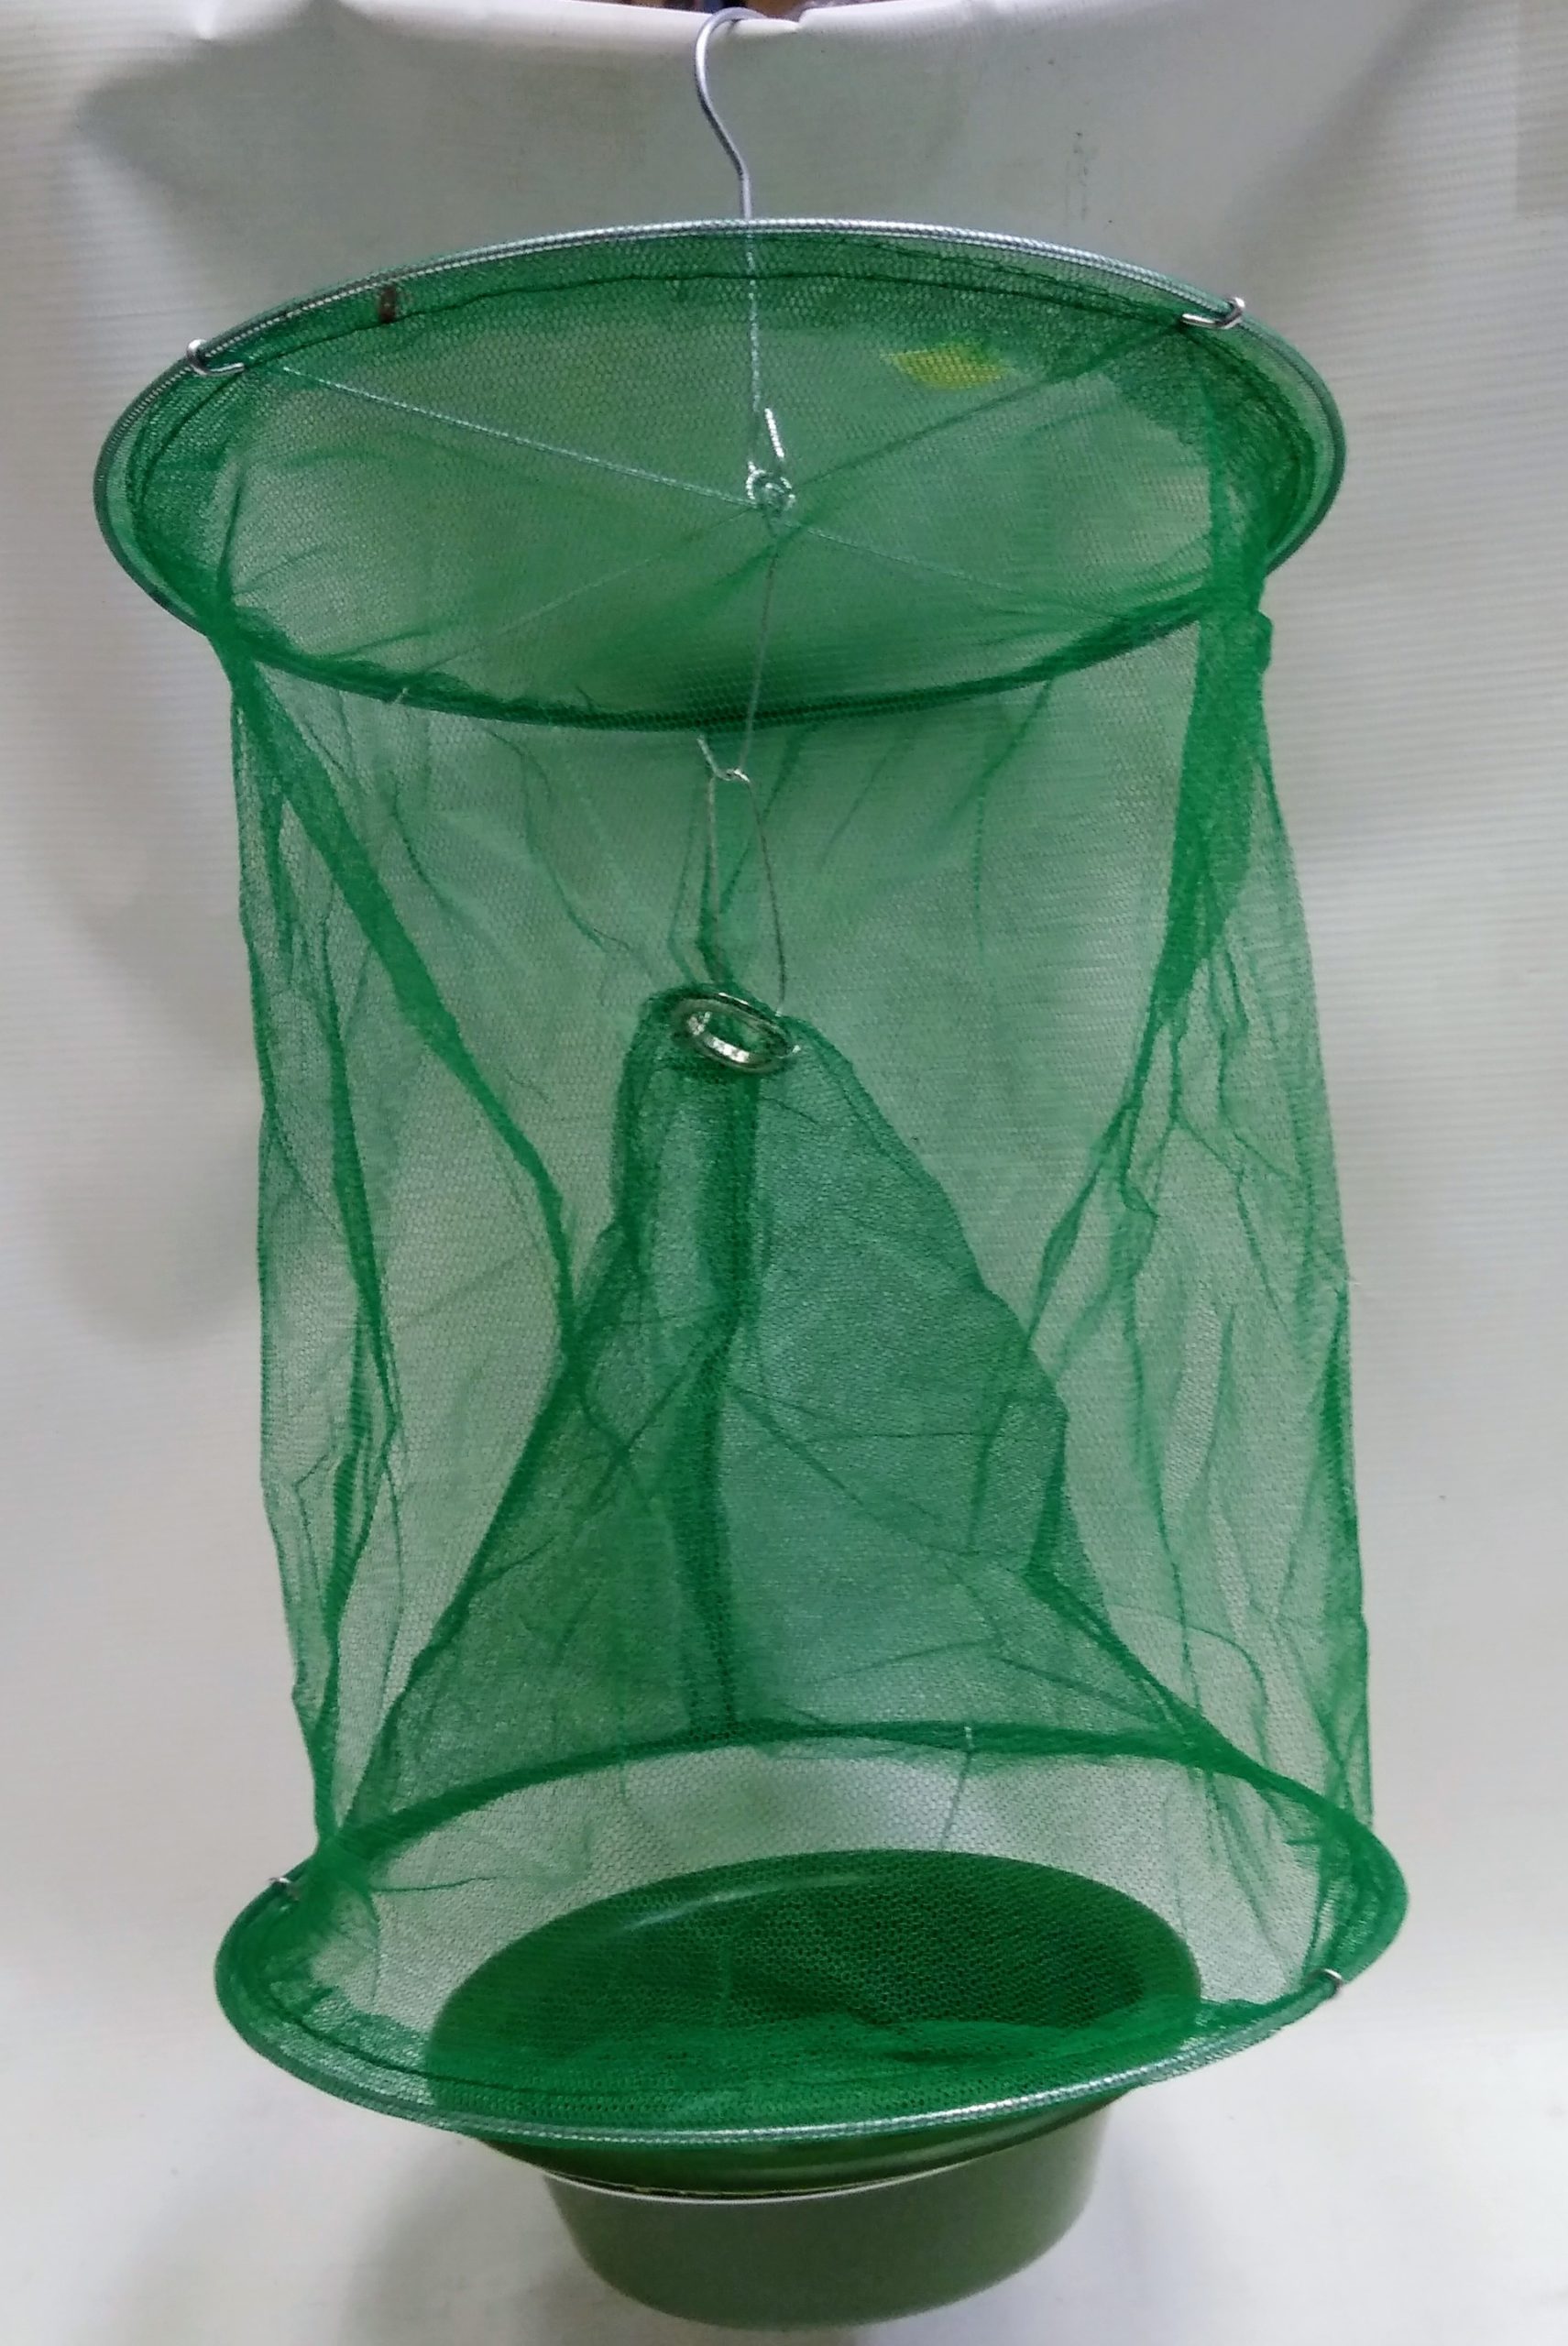 The Ranch Fly Trap Green - Huber's Animal Health